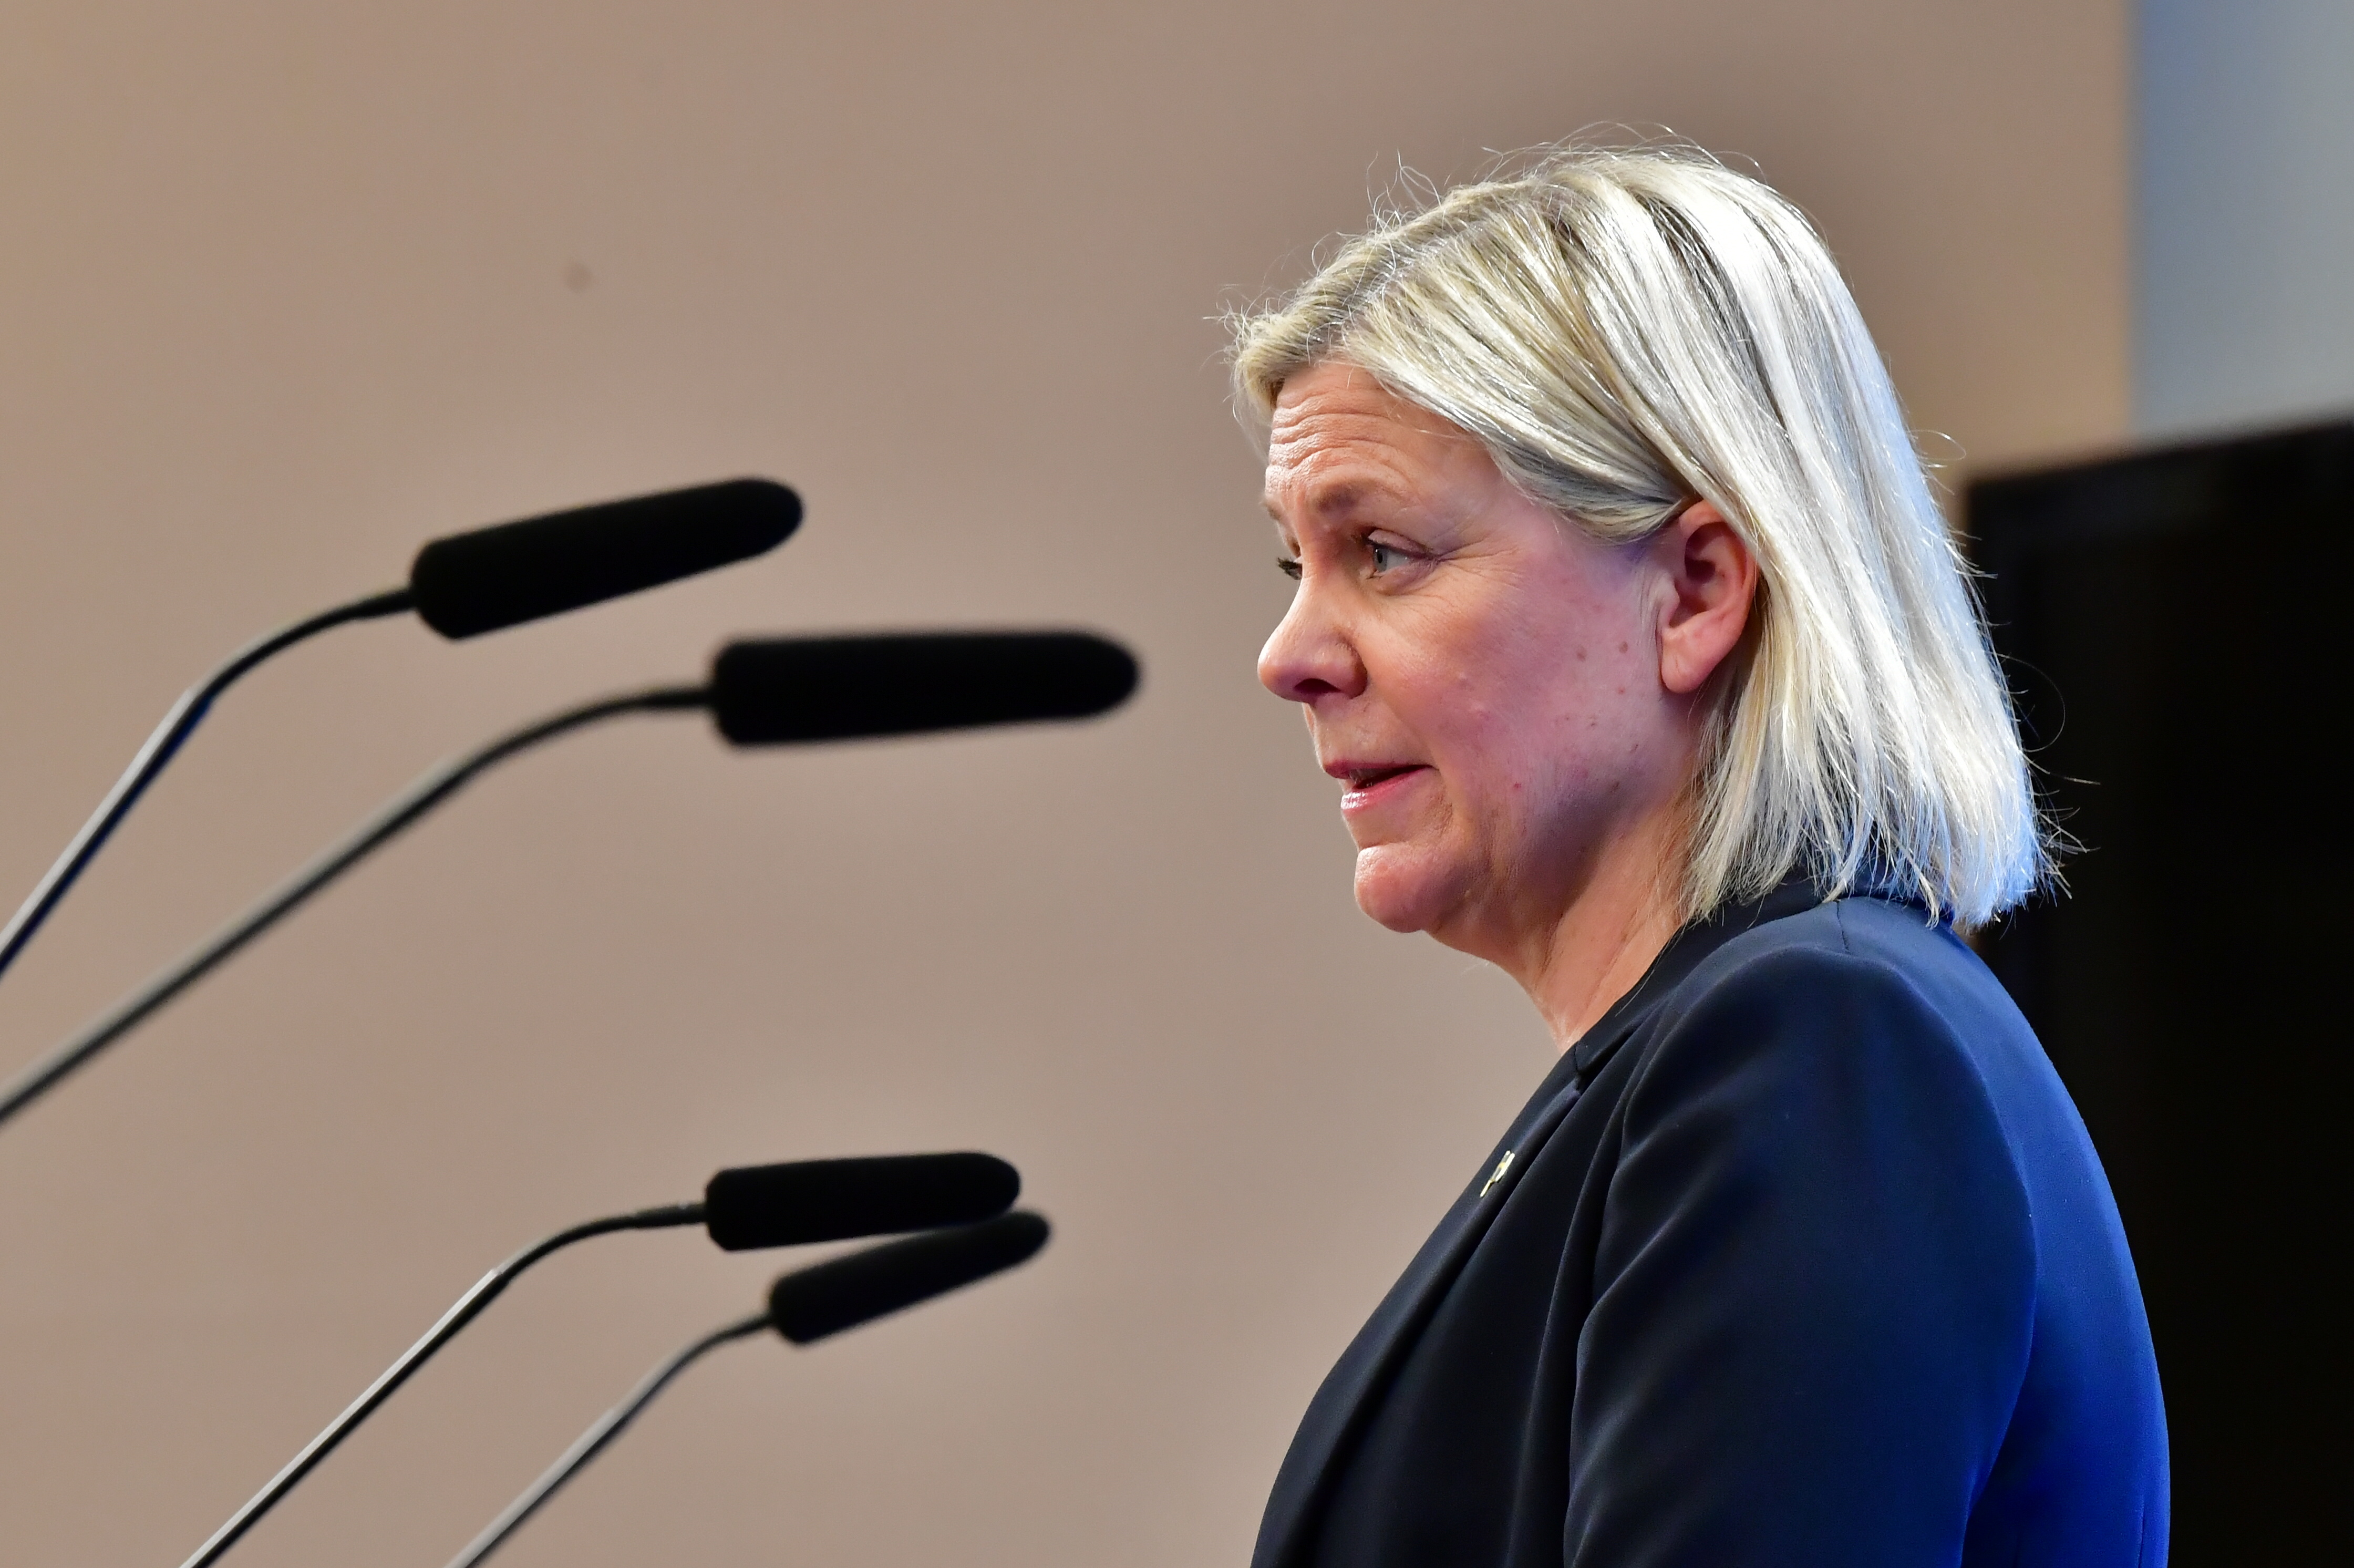 Current Finance Minister and Social Democratic Party leader Magdalena Andersson speaks during press conference after being appointed as new prime minister after a voting iin the Swedish parliament Riksdagen, in Stockholm, Sweden November 29, 2021. Jonas Ekstromer /TT News Agency/via REUTERS 